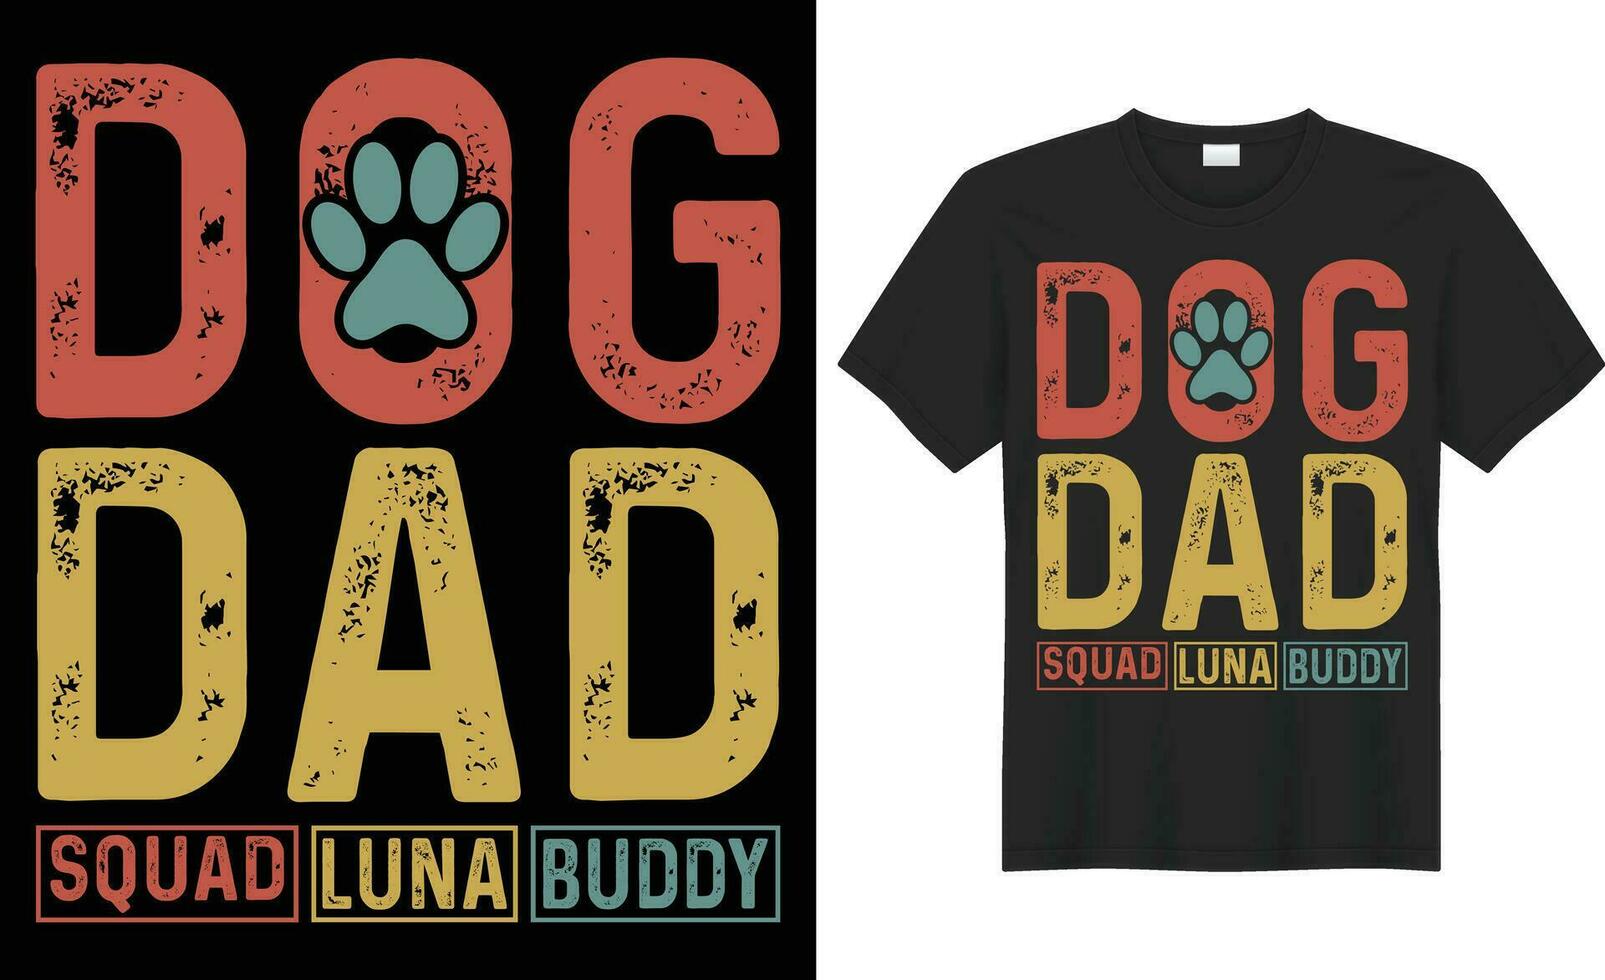 Dog dad squad luna buddy typography vector t-shirt design. Perfect for print items and bags, poster, sticker, template, banner. Handwritten vector illustration. Isolated on black background.